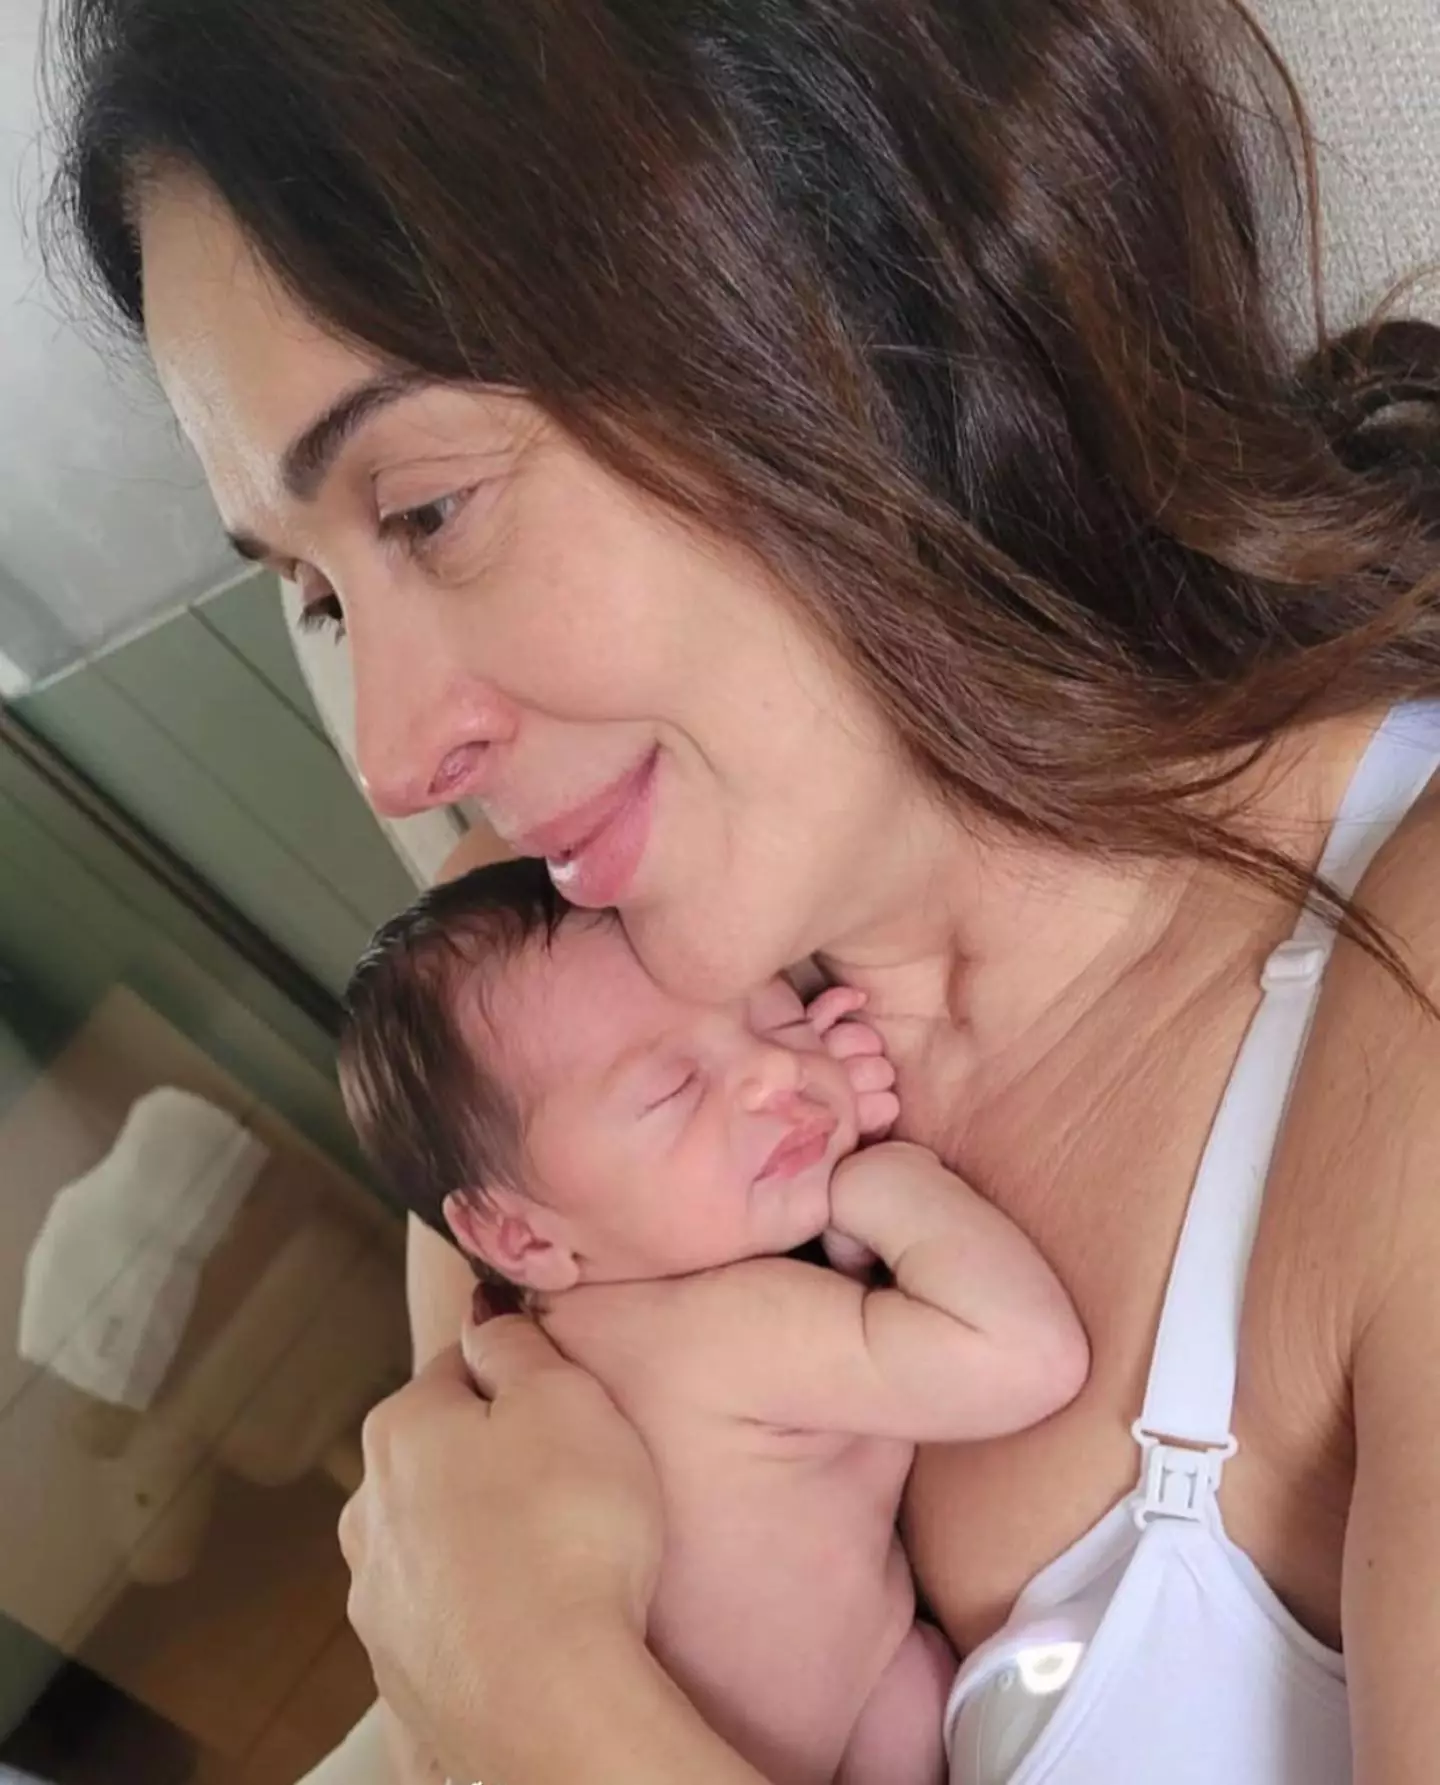 The Brazilian star gave birth to a son last month.